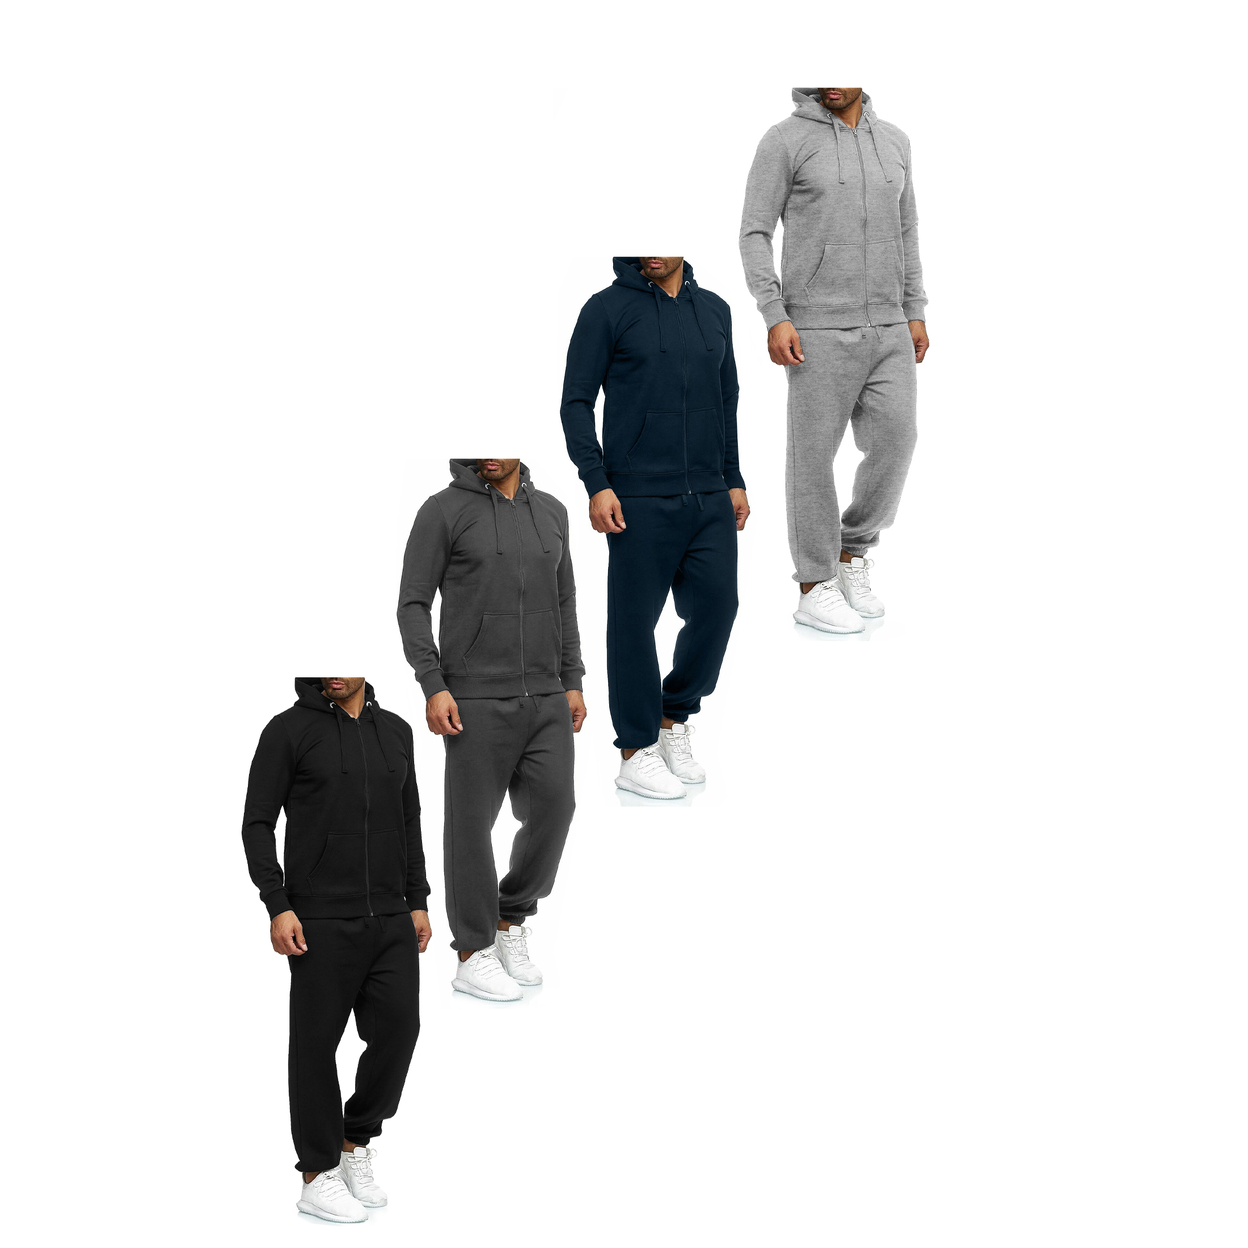 Multi-Pack: Men's Casual Big & Tall Athletic Active Winter Warm Fleece Lined Full Zip Tracksuit Jogger Set - Charcoal, 2-pack, Large